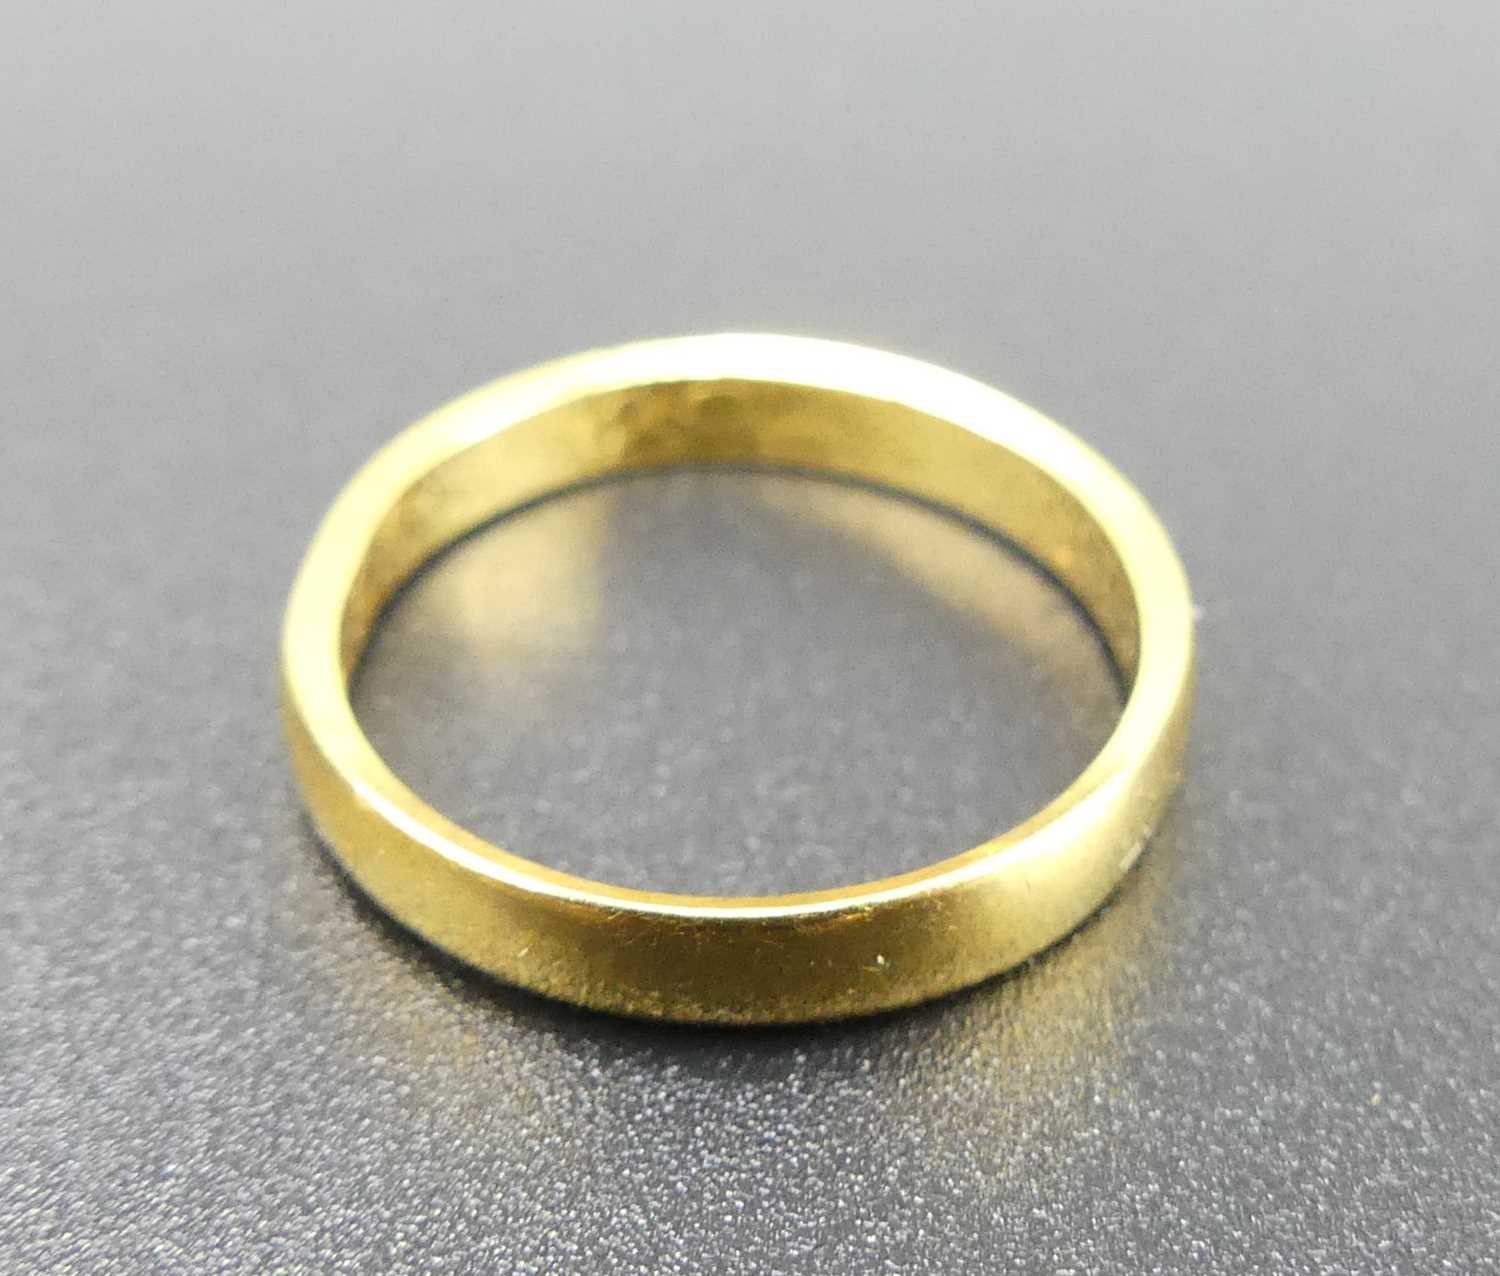 A 22ct gold wedding band, 2.9g (misshapen) - Image 2 of 2